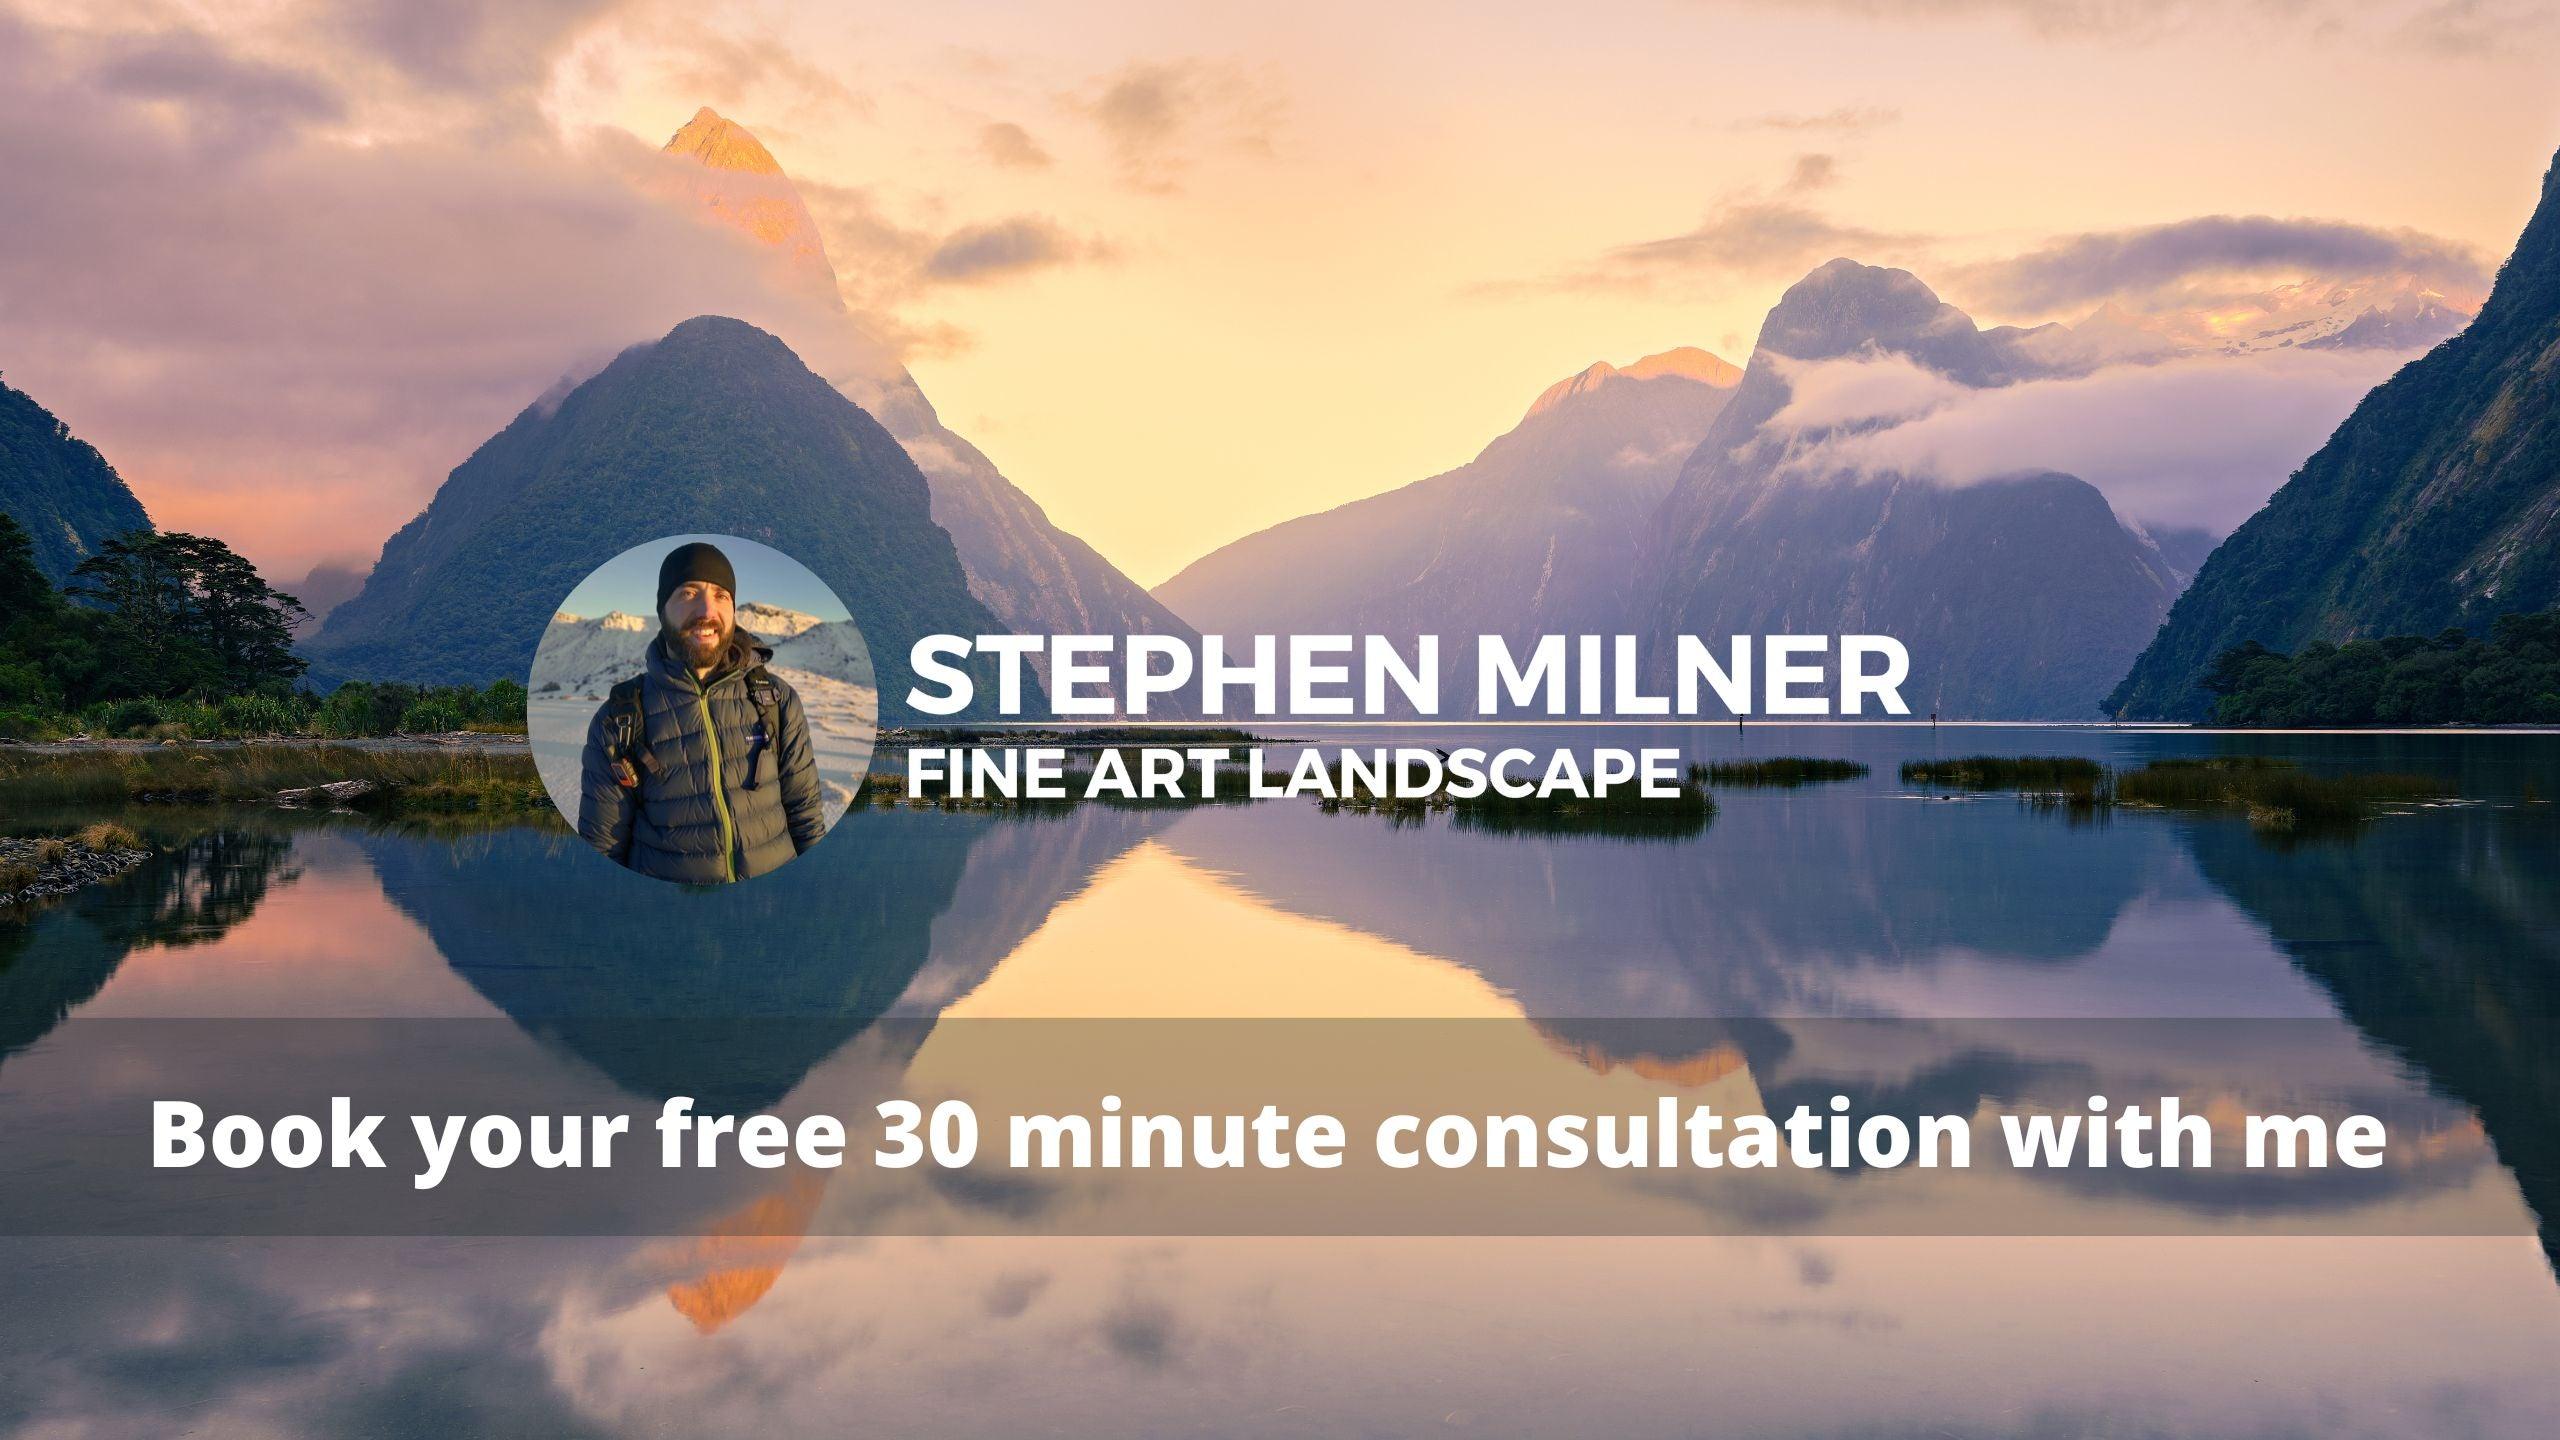 A call-to-action image, inviting viewers to contact Stephen Milner for an immersive photography experience in New Zealand.